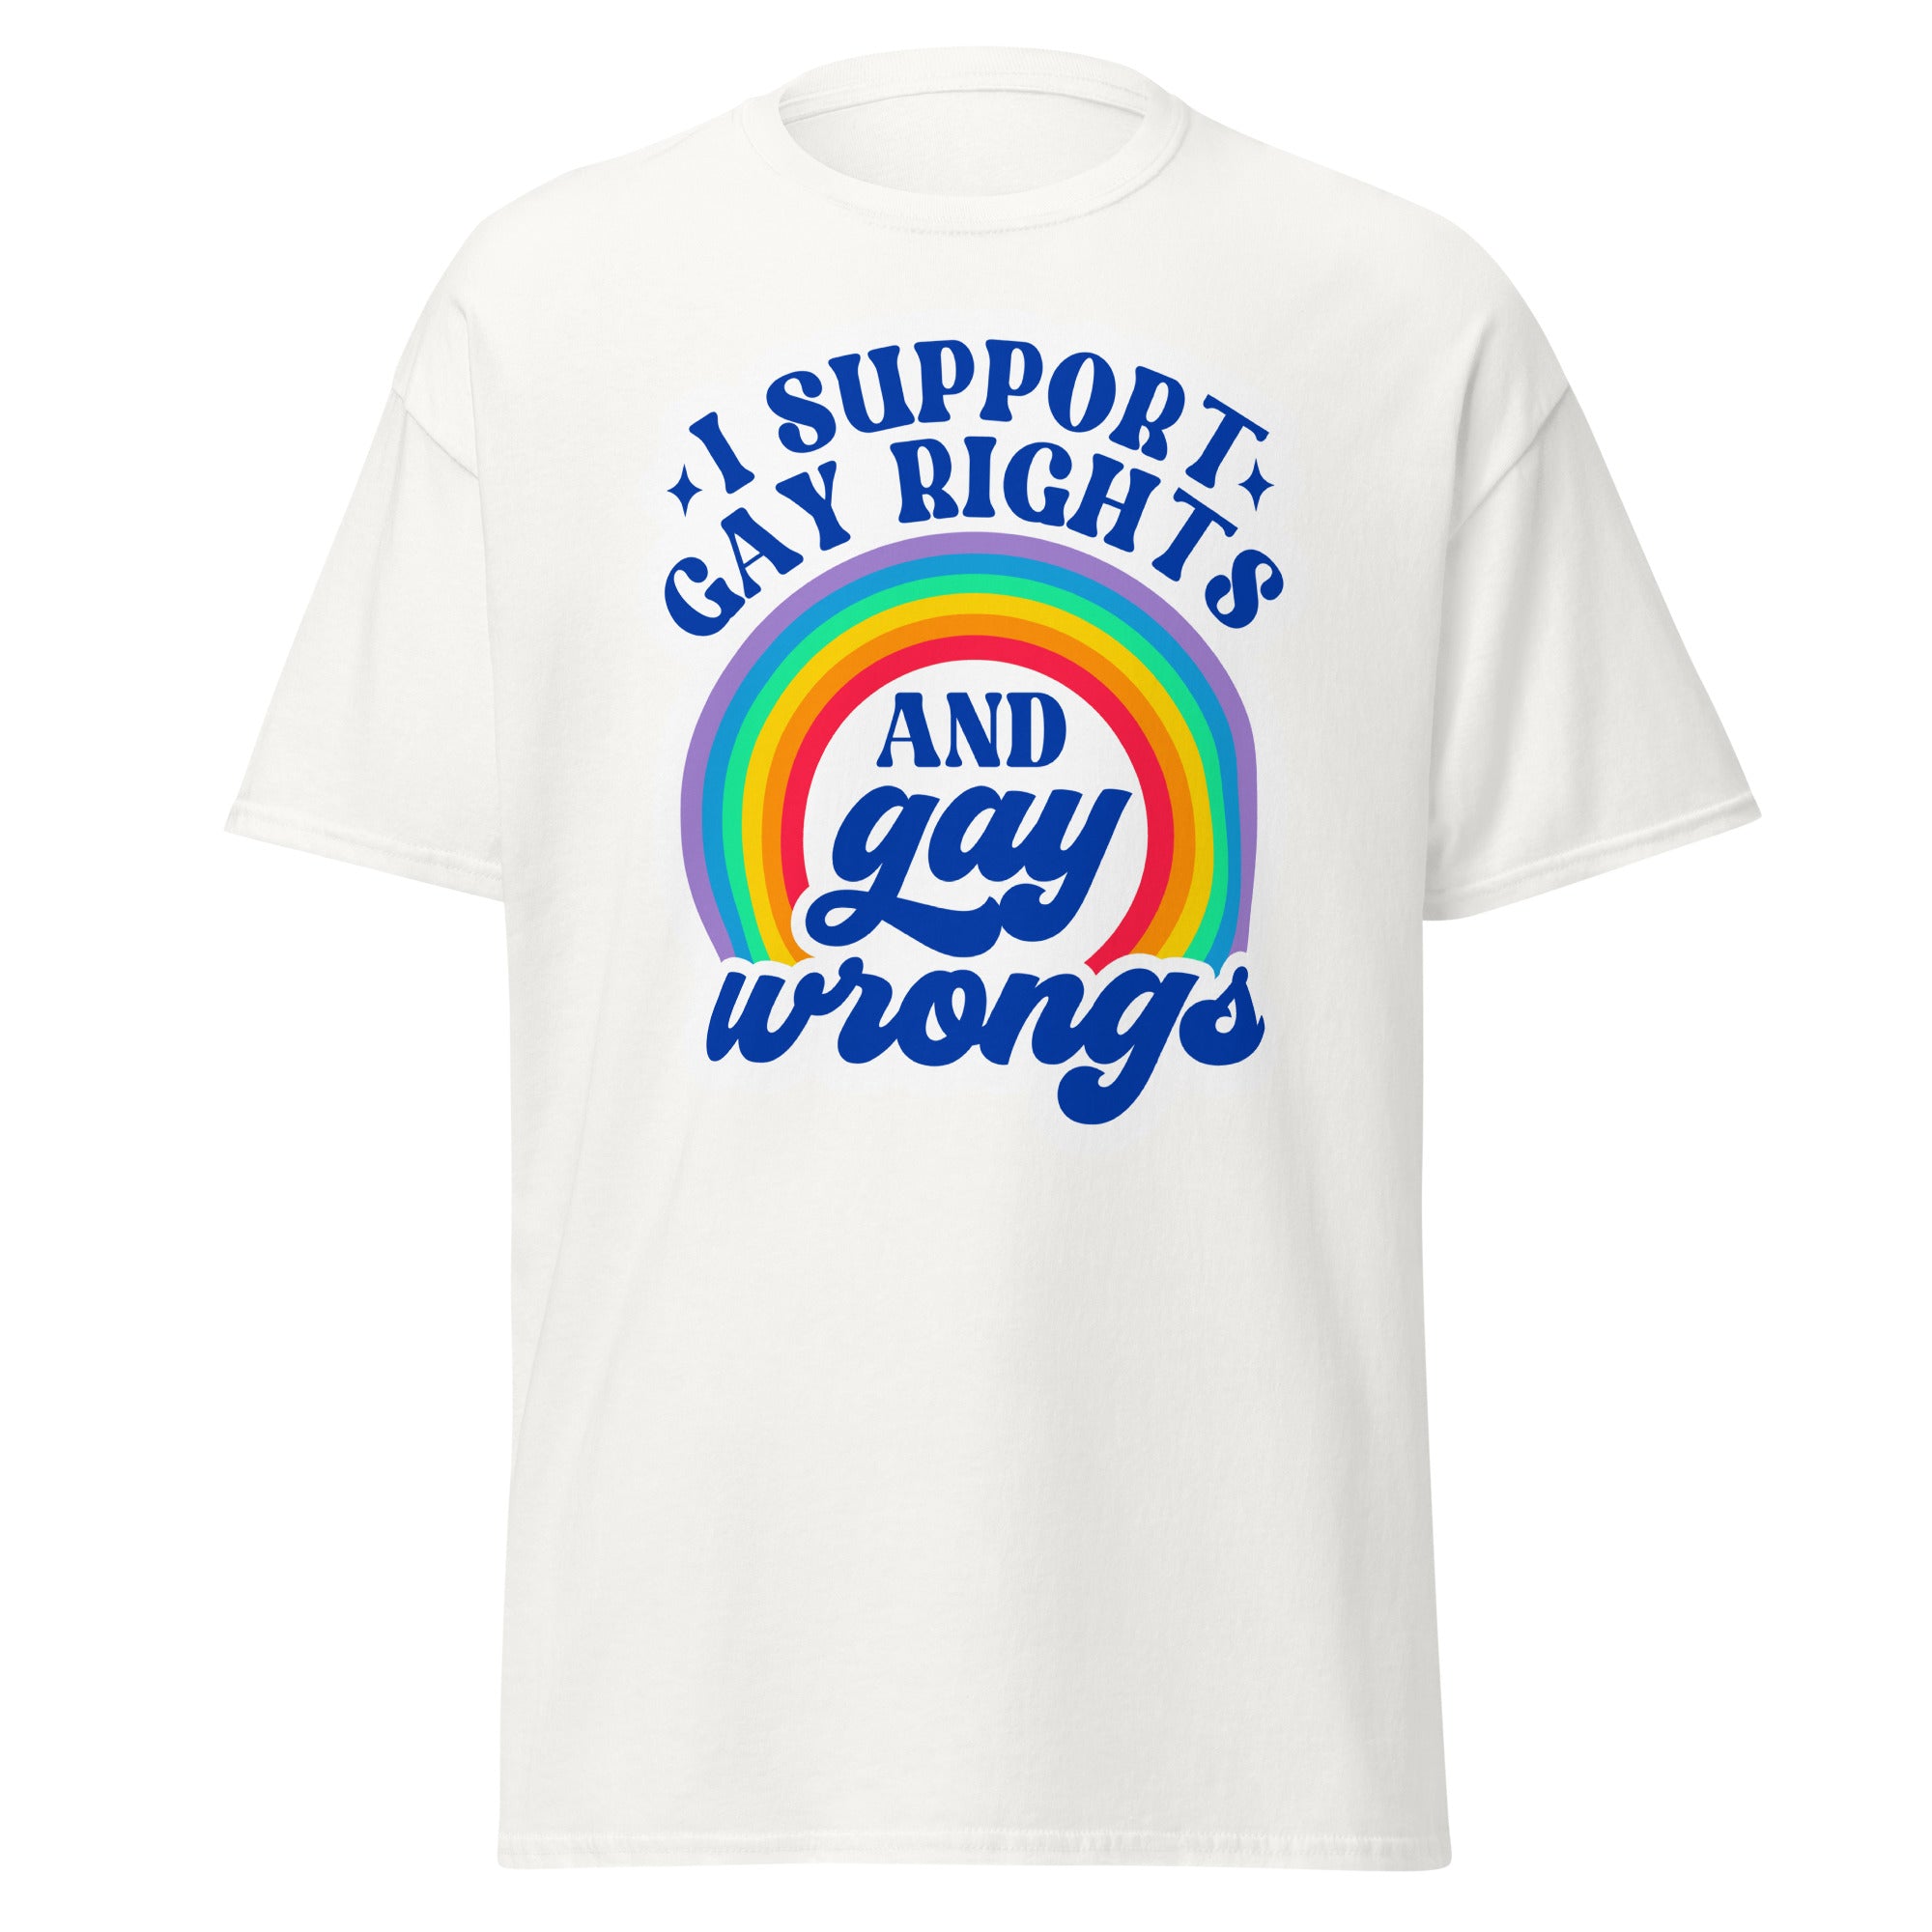 I SUPPORT GAY RIGHTS AND gay wrongs Unisex T Shirt